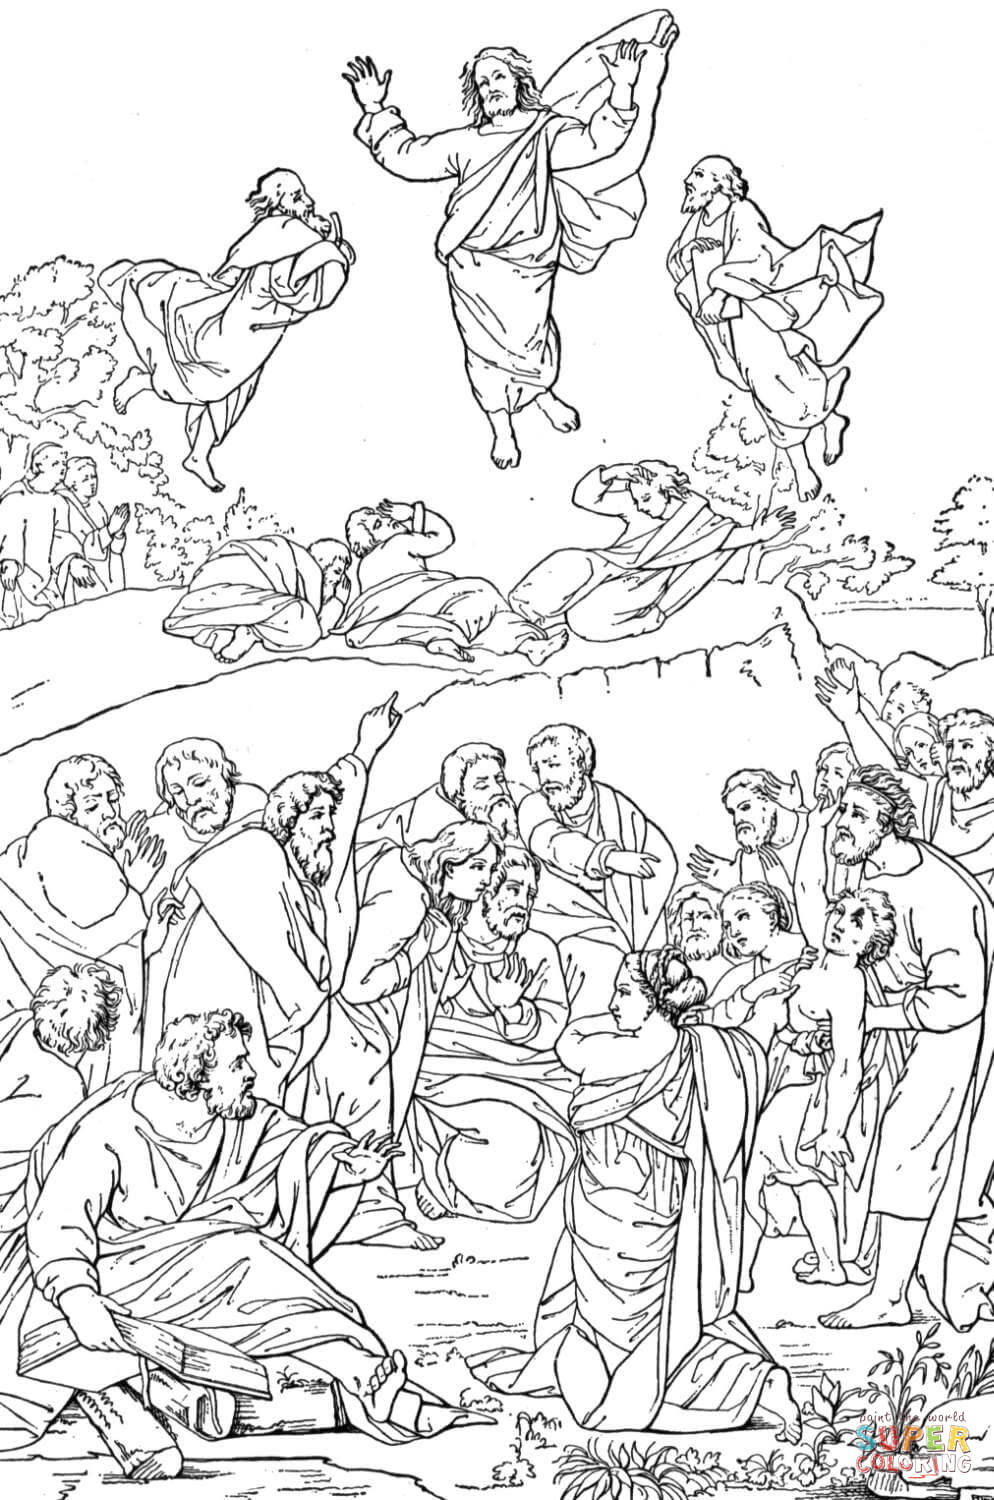 Transfiguration of Christ coloring page | Free Printable Coloring ...